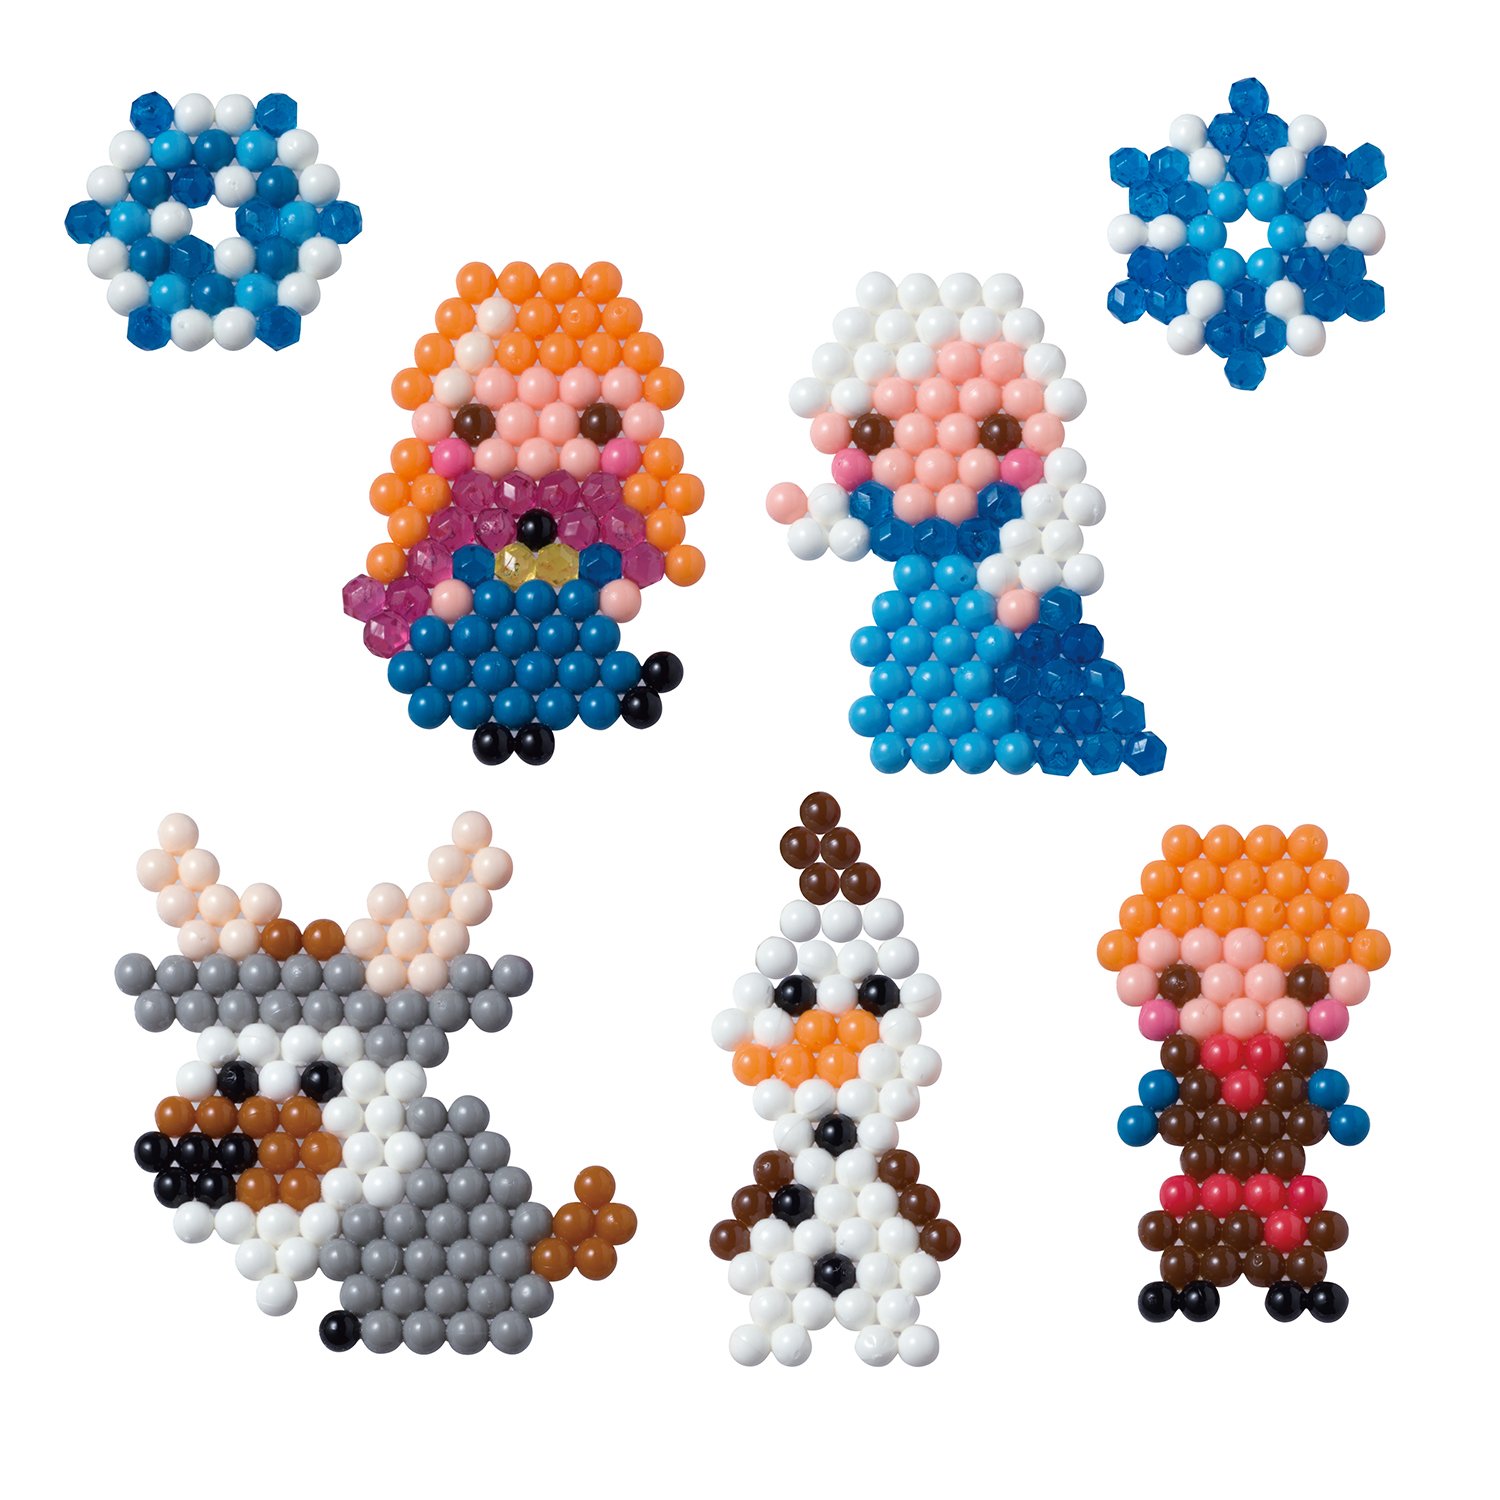 Aquabeads - Disney Frozen Character Playset - Your Child Can Create Colorful Bead Art - Spray to Set Bead Designs for a Lasting Craft - Contains Over 800 Beads